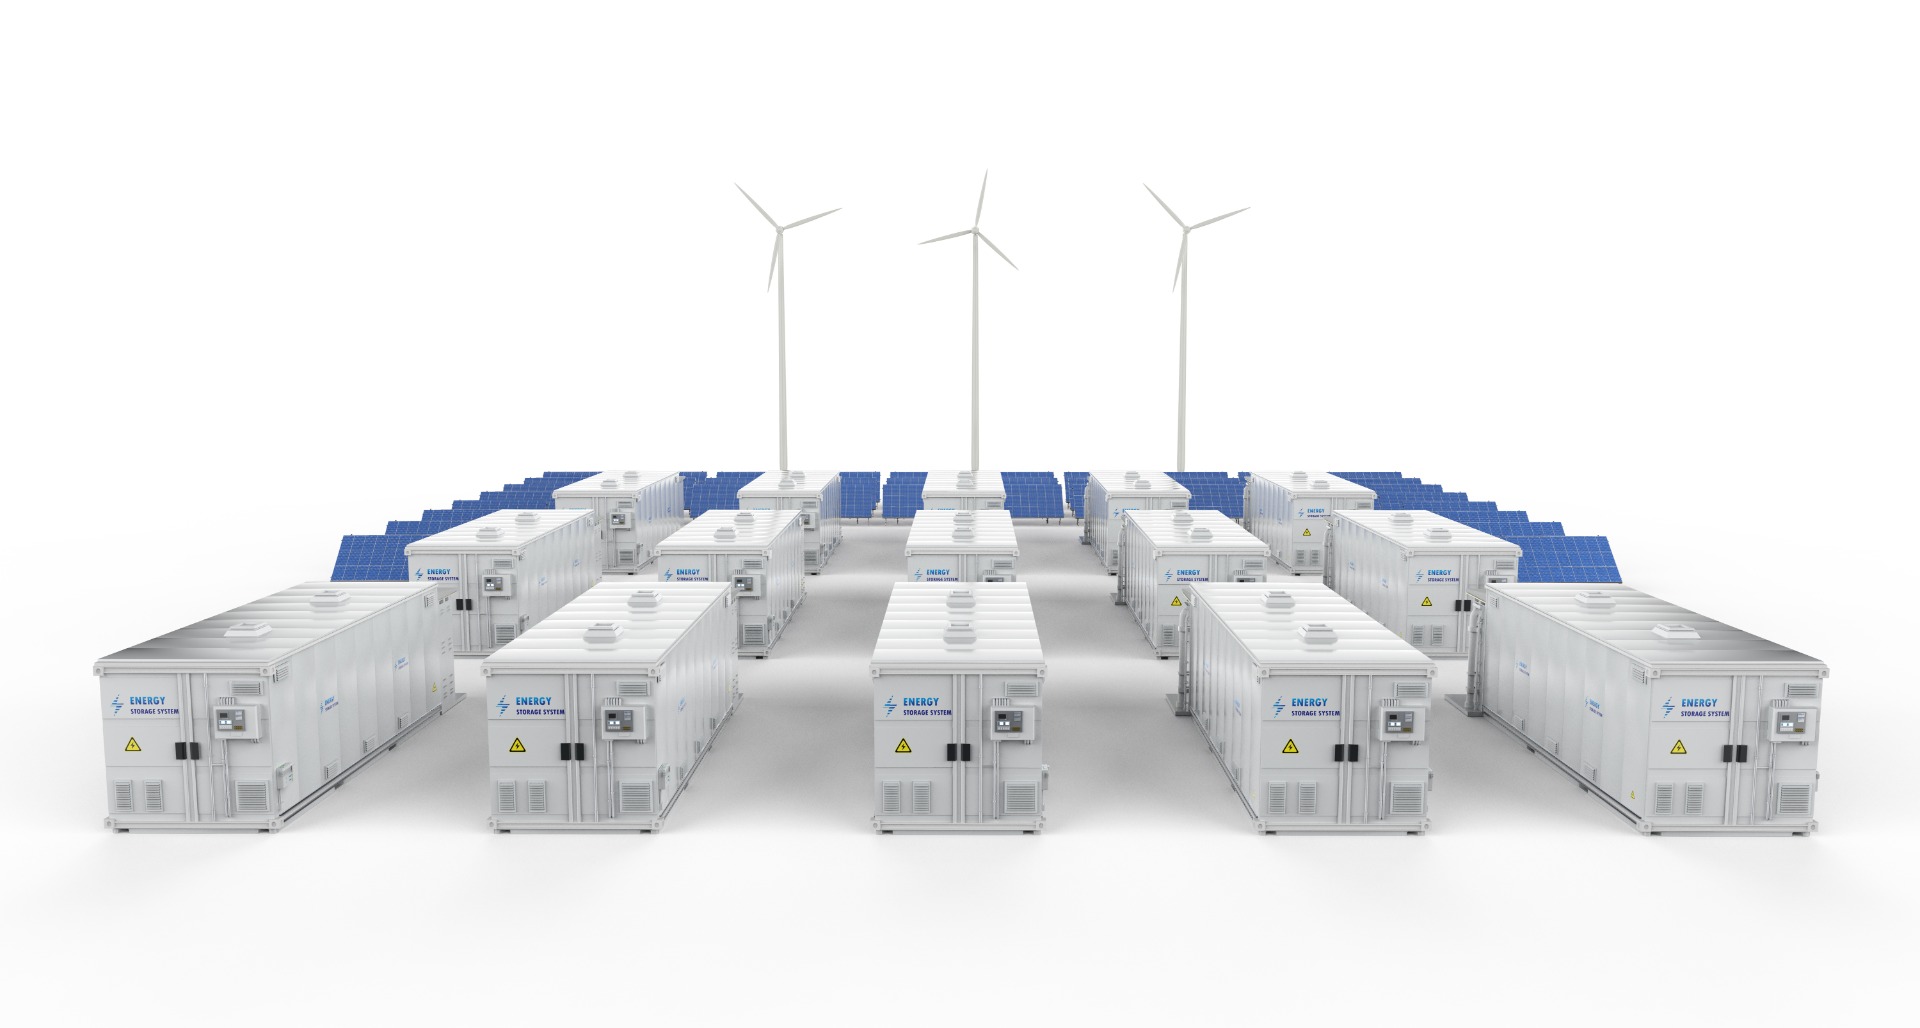 amount-energy-storage-systems-battery-container-units-with-solar-turbine-farm